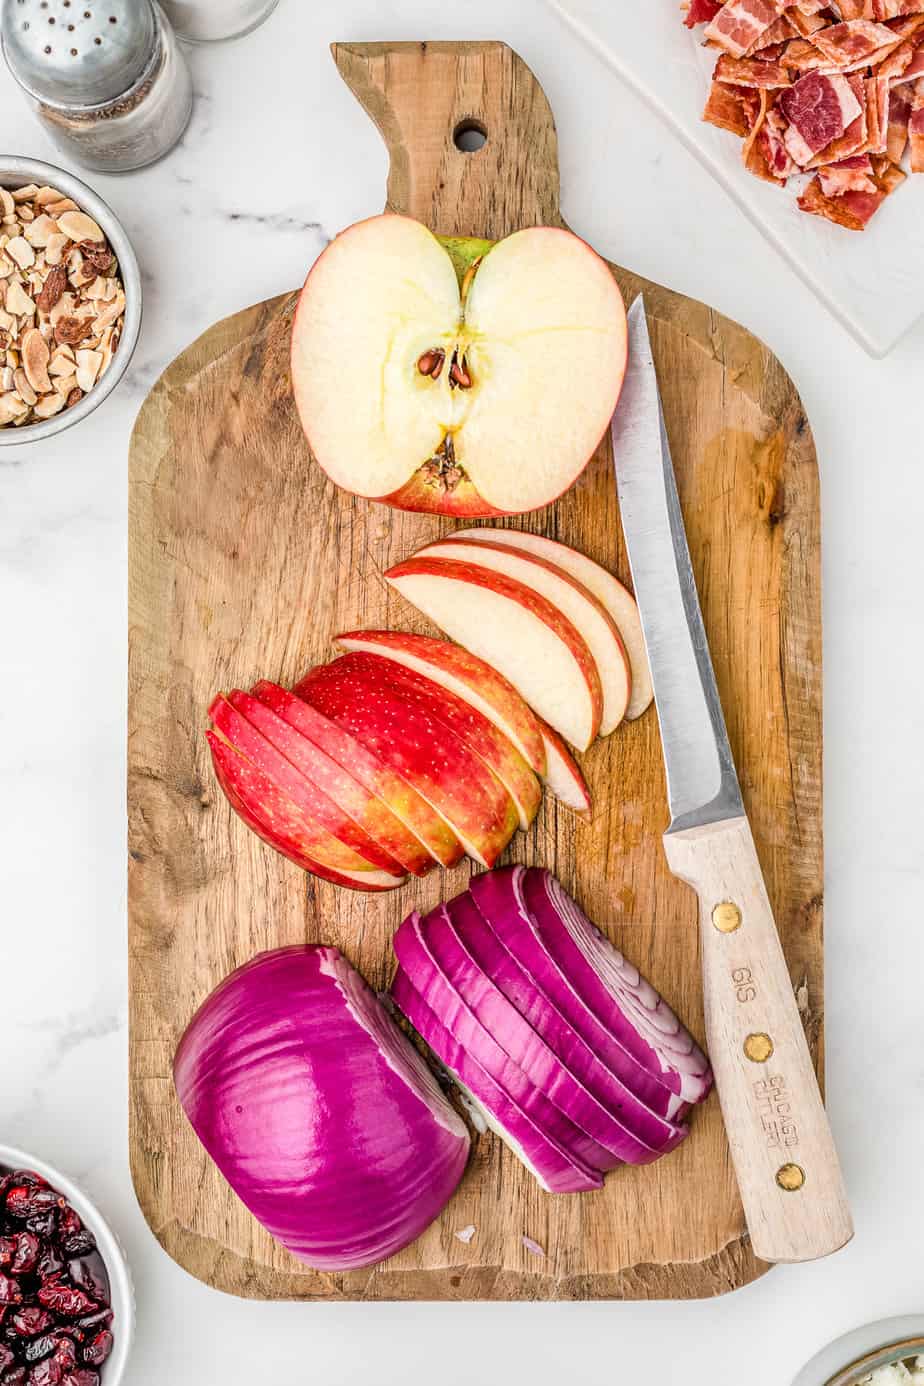 An apple half sliced and an onion all the way sliced into thin slices pn a cutting board from overhead on a counter next to a knife.